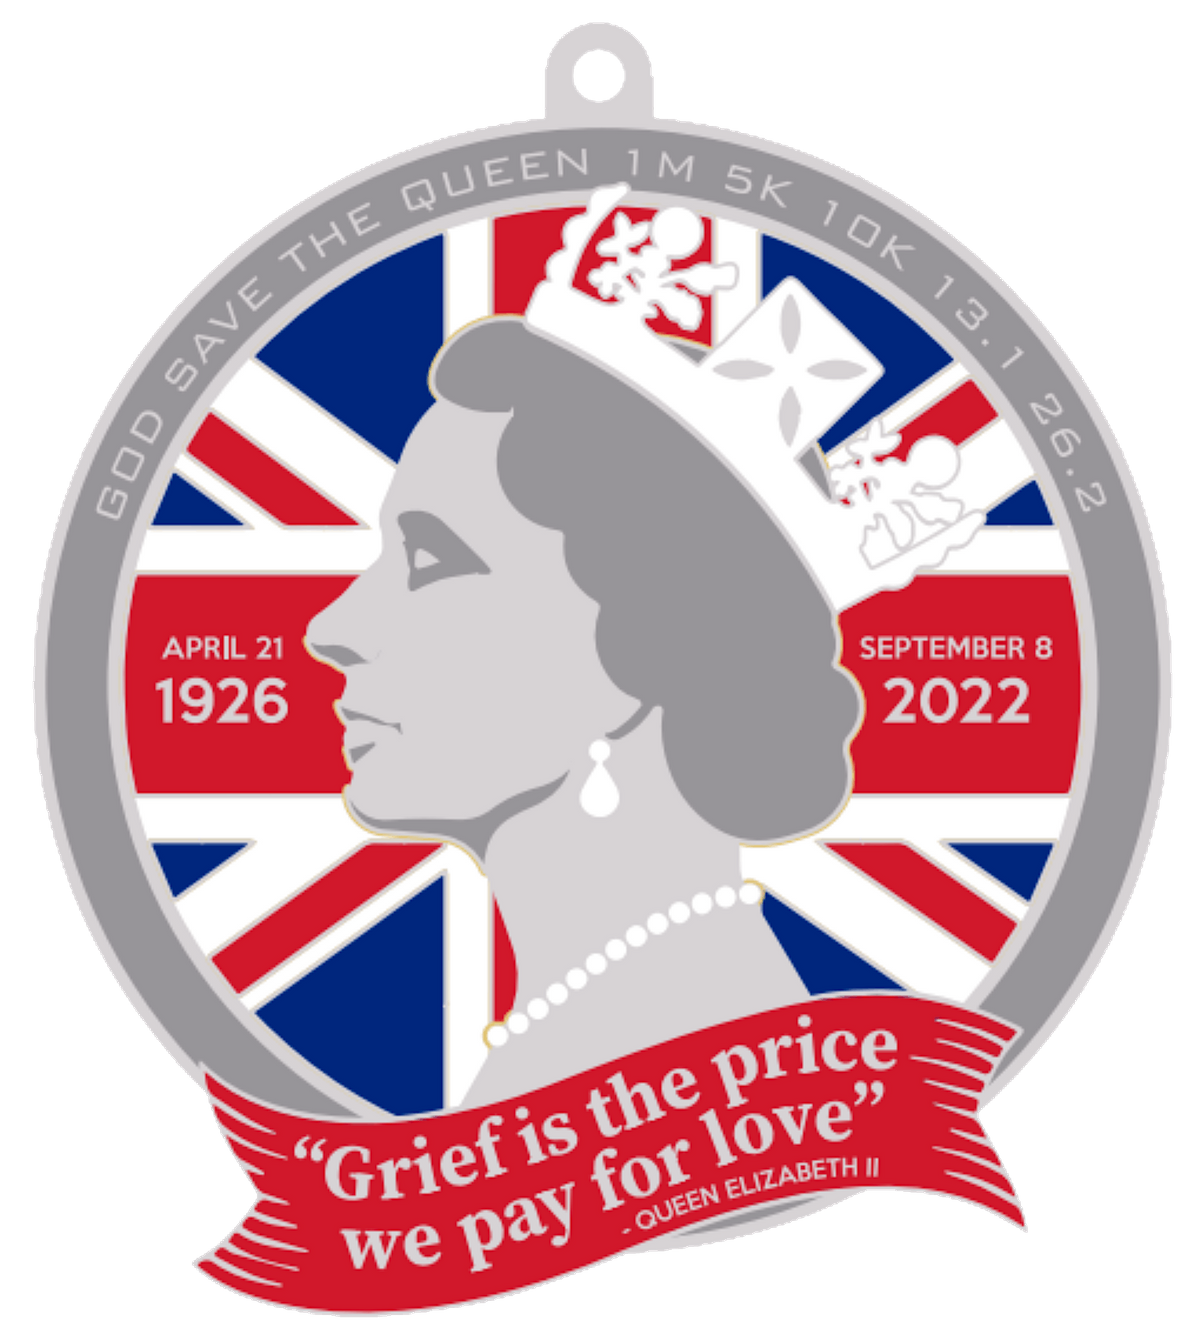 God Save the Queen 1M 5K 10K 13.1 26.2-Participate from Home! Save $2!